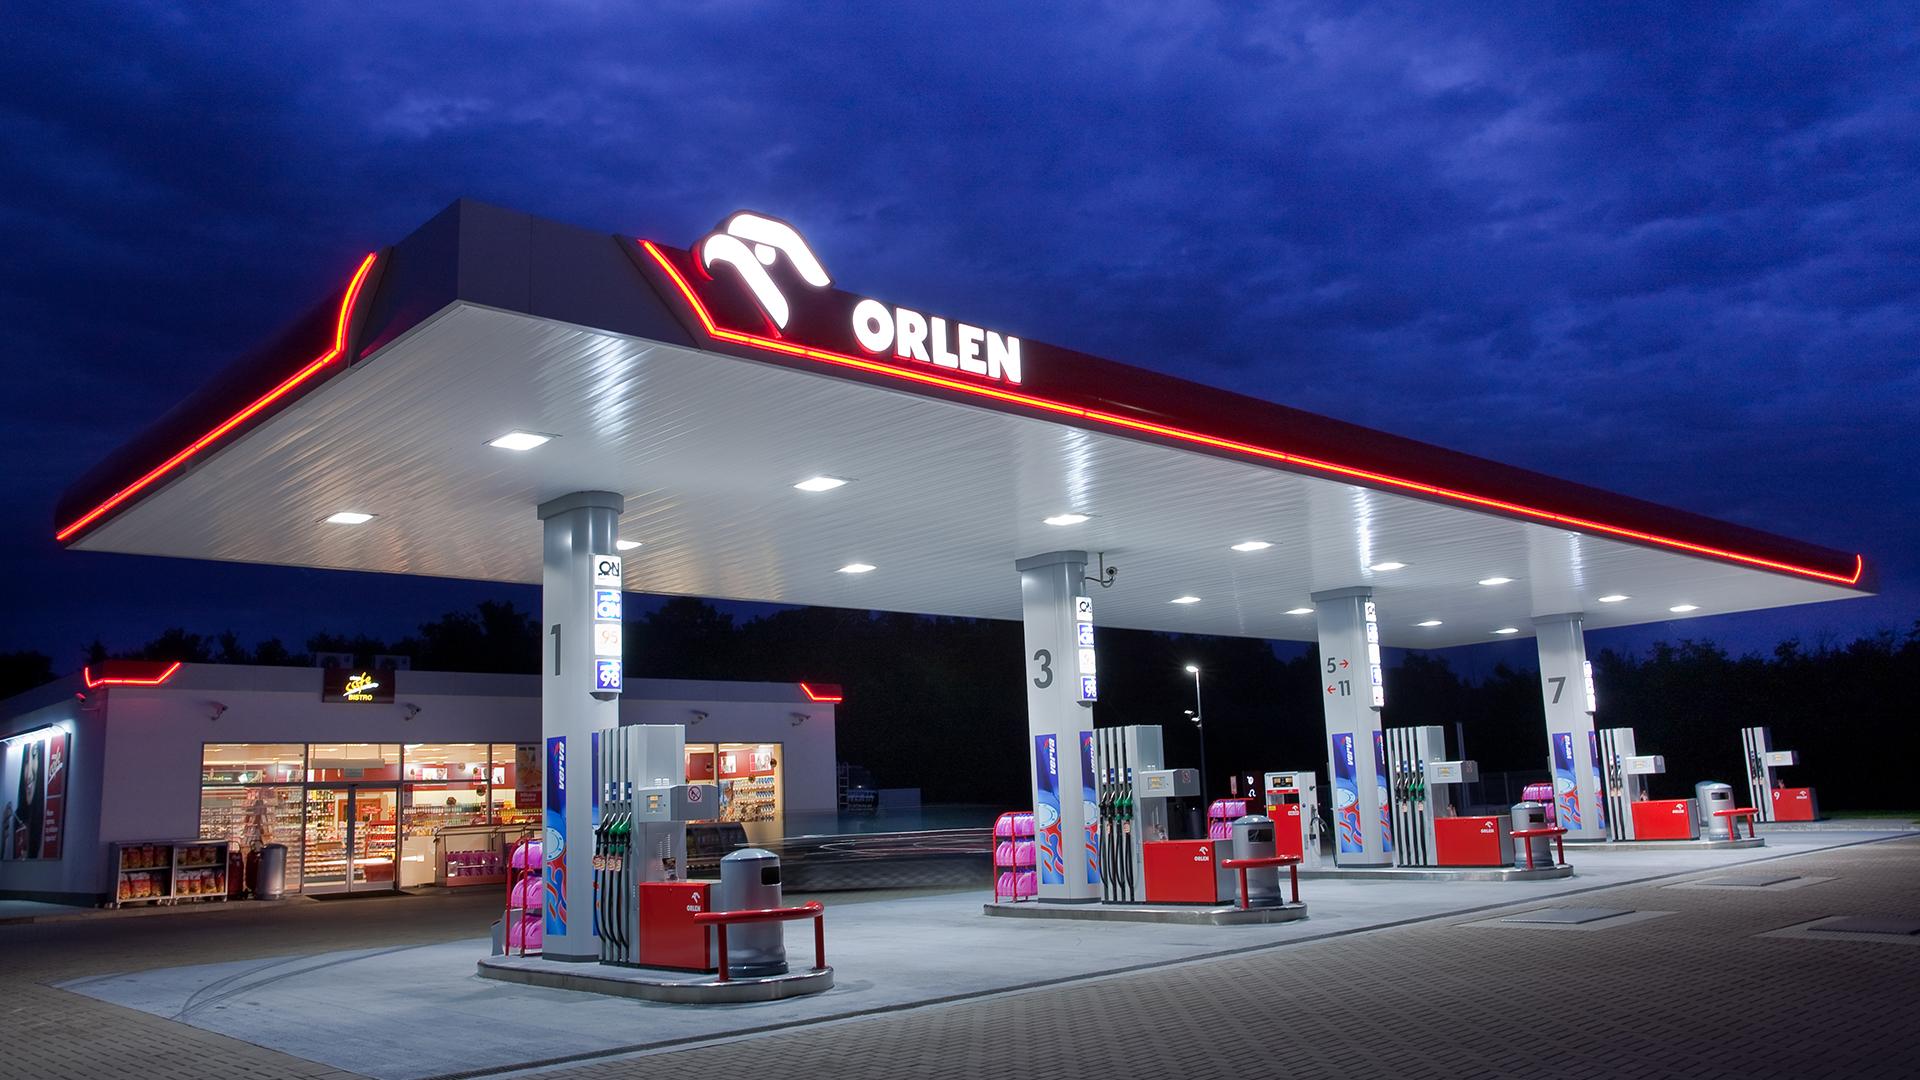 Orlen Service Station canopy produced by Visotec